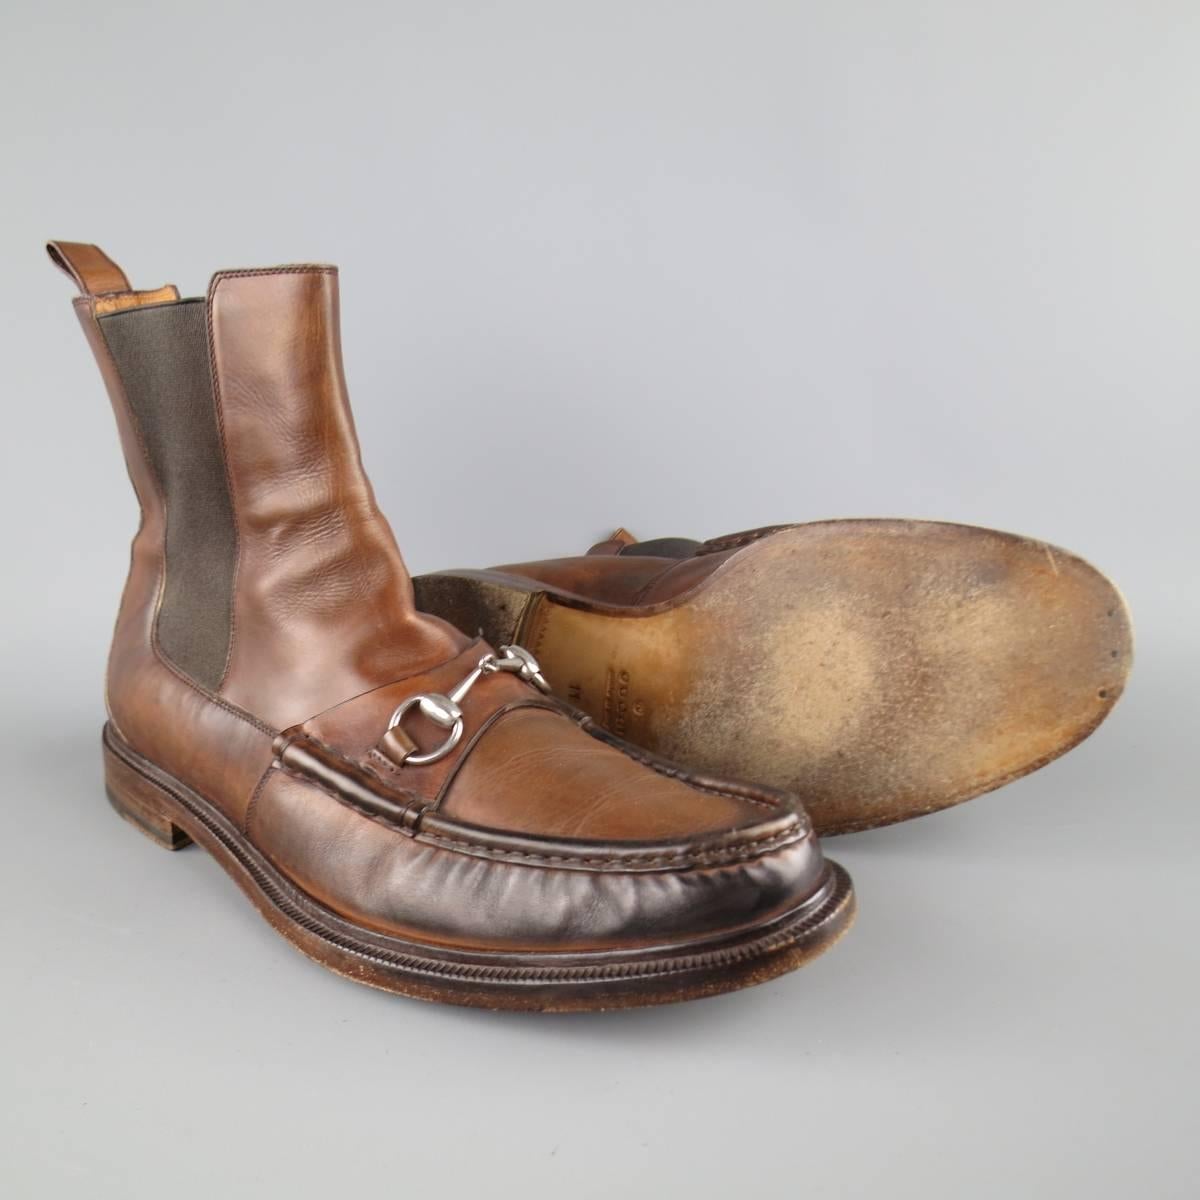 GUCCI ankle boots in a distressed tan brown leather featuring a loafer top stitch toe with silver tone horsebit. Made in Italy.
 
Good Pre-Owned Condition.
Marked: UK 11
 
Outsole: 12.5 X 4.5 in.
Height: 6.5 in.
